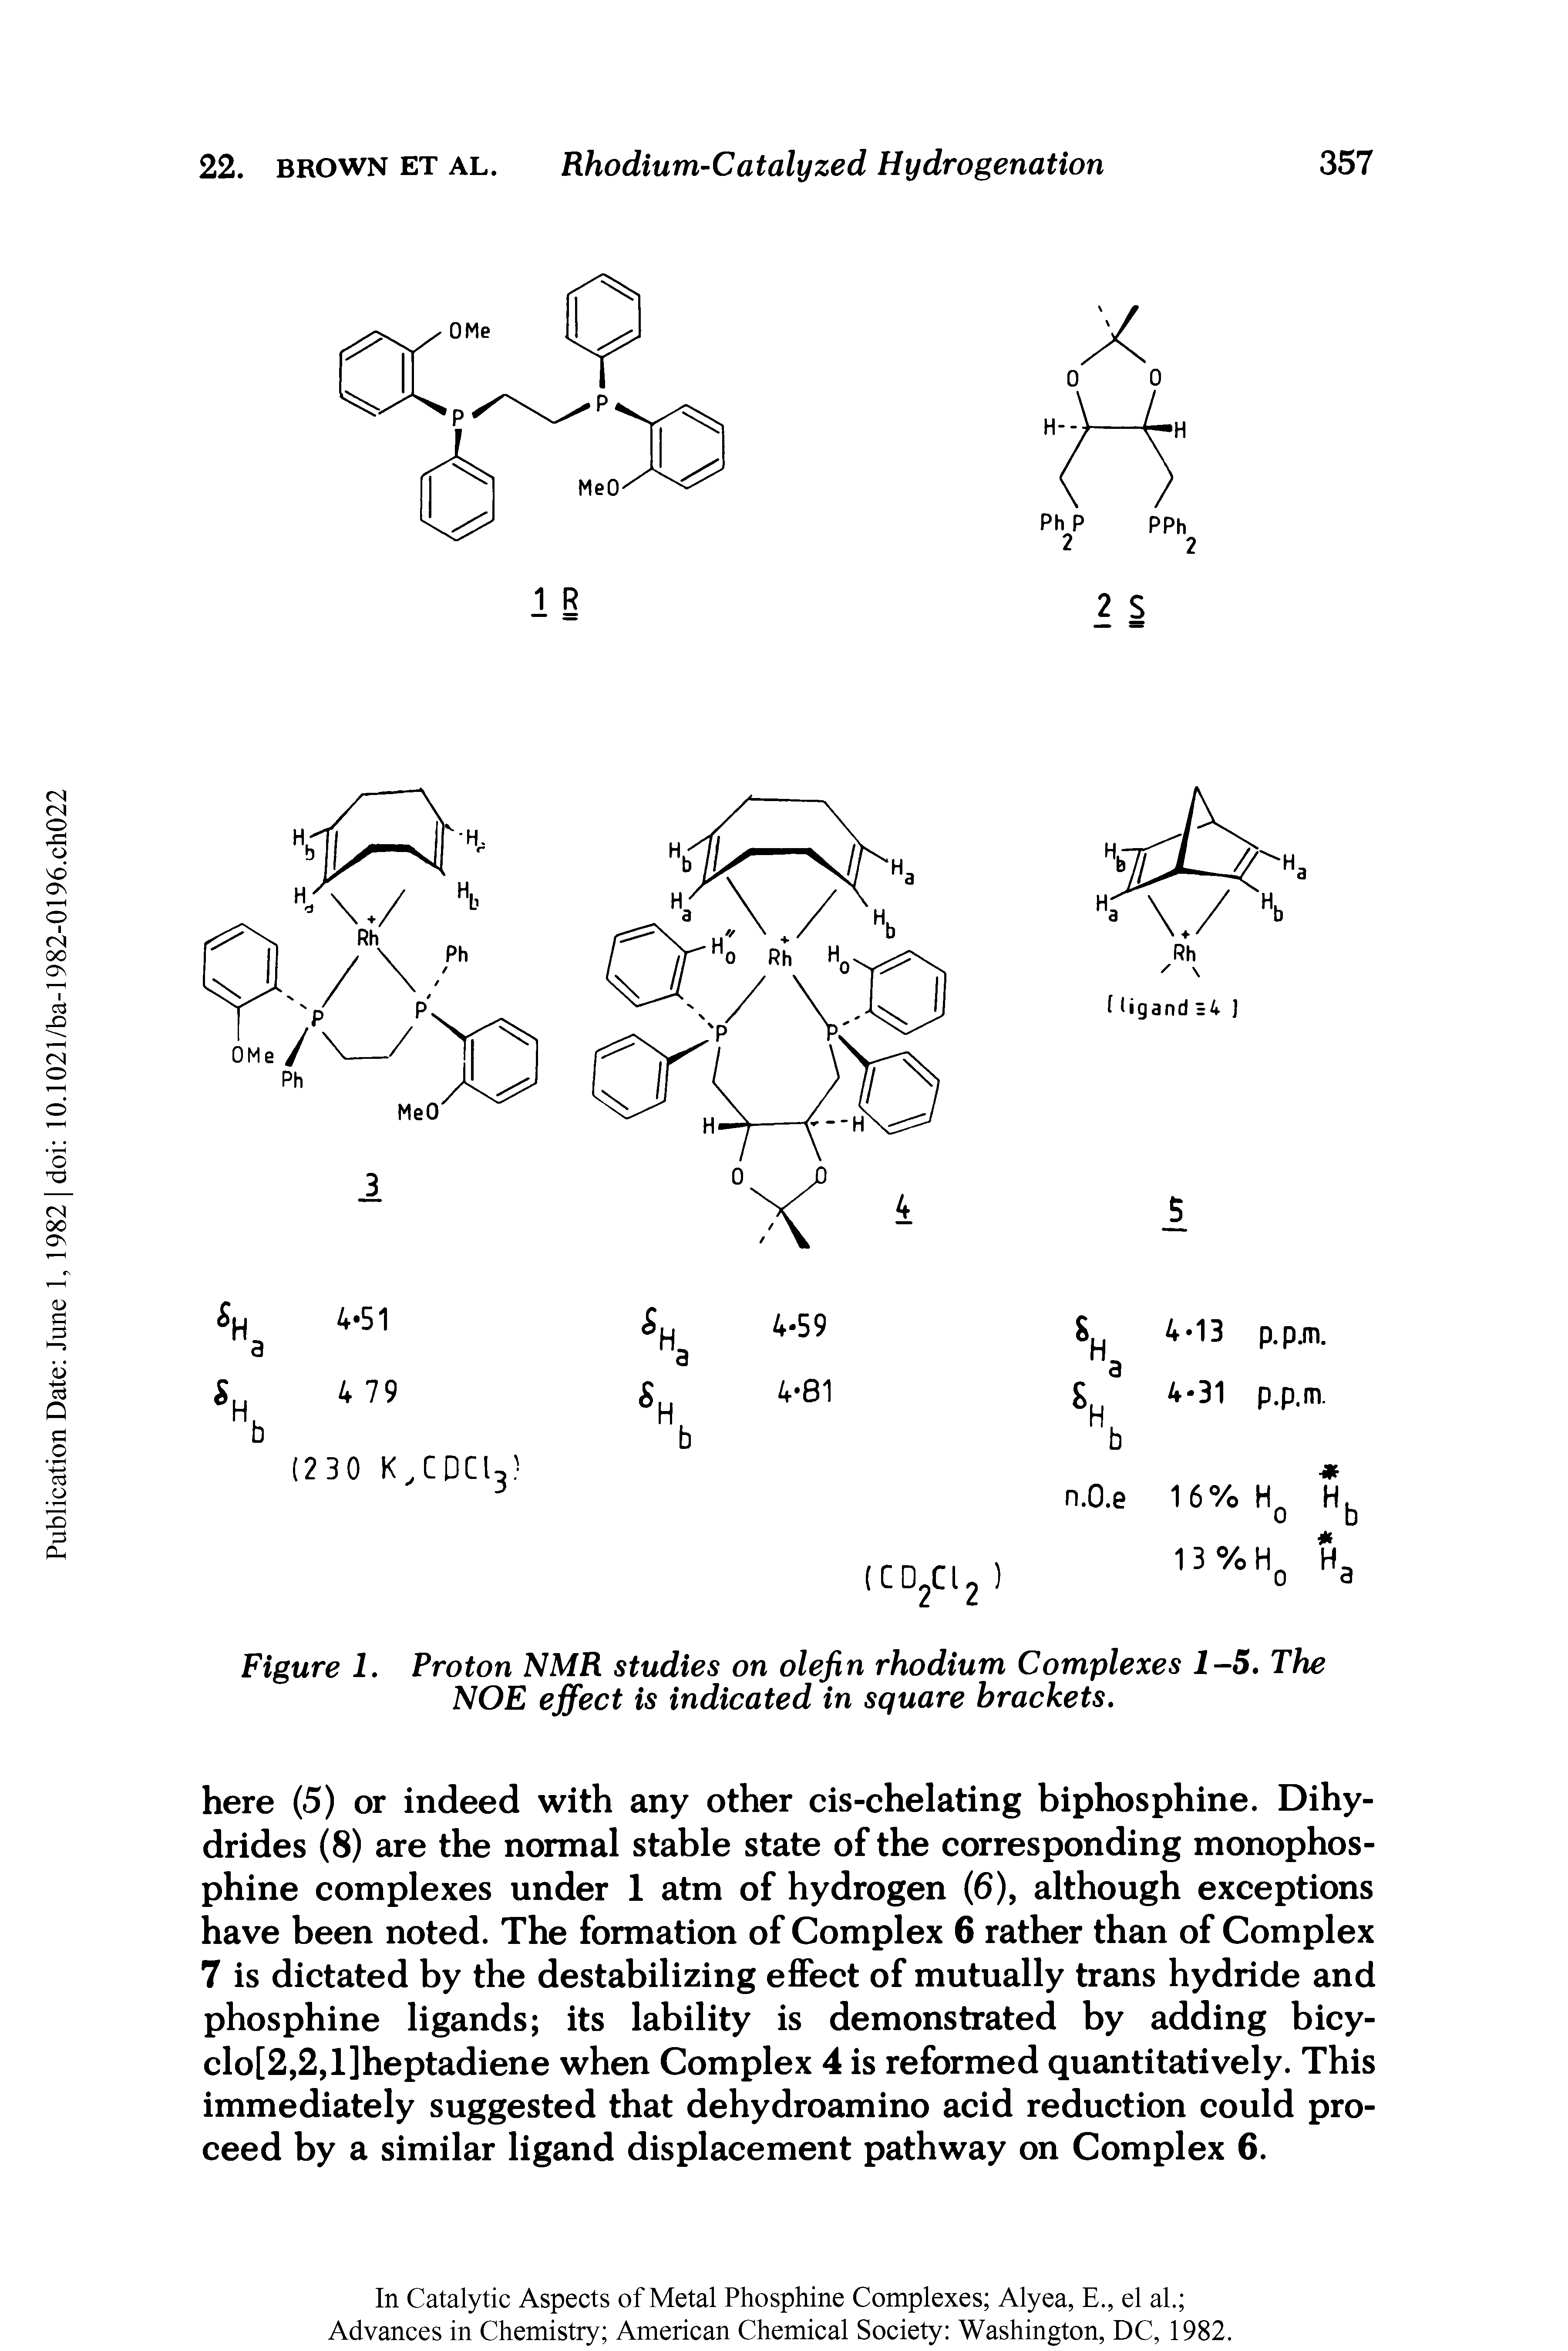 Figure 1. Proton NMR studies on olefin rhodium Complexes 2-5. The NOE effect is indicated in square brackets.